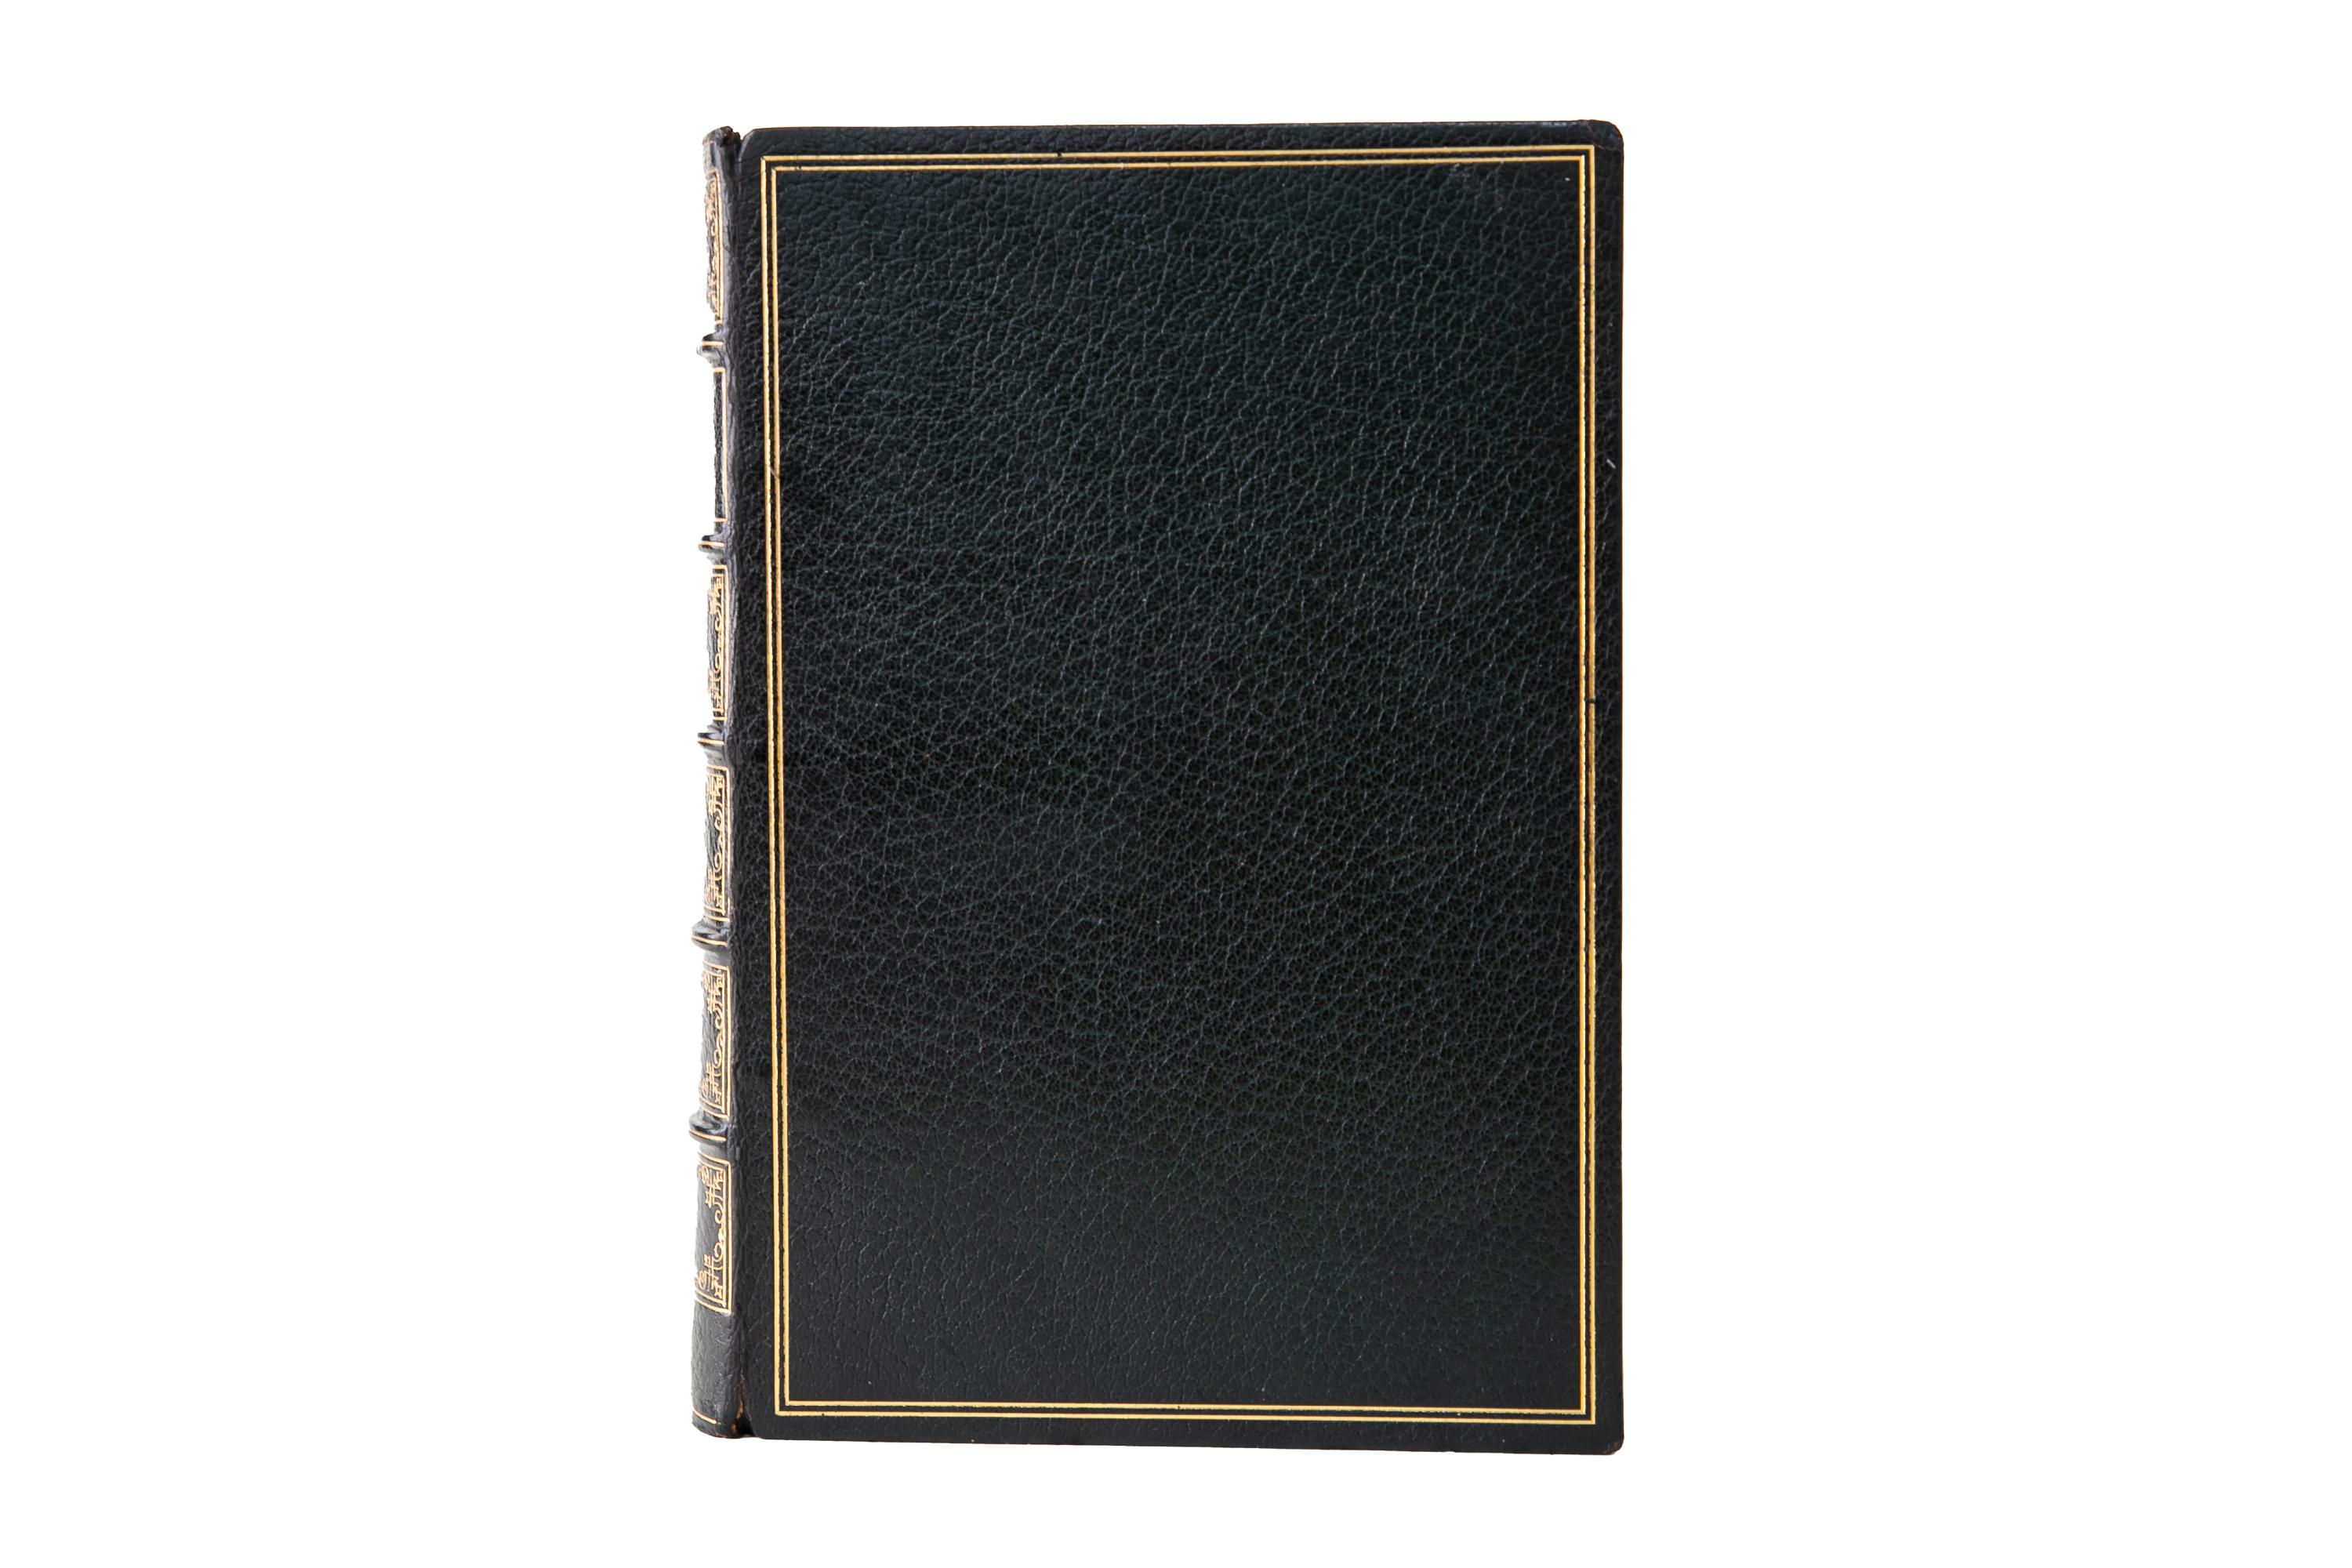 1 Volume. William Cullen Bryant, The Poetical Works. Roslyn Edition. Bound by the Monastery Hill Bindery in full green morocco with gilt-tooling on the covers and raised band spine. With chronologies of Bryant's life & Poems and a bibliography of